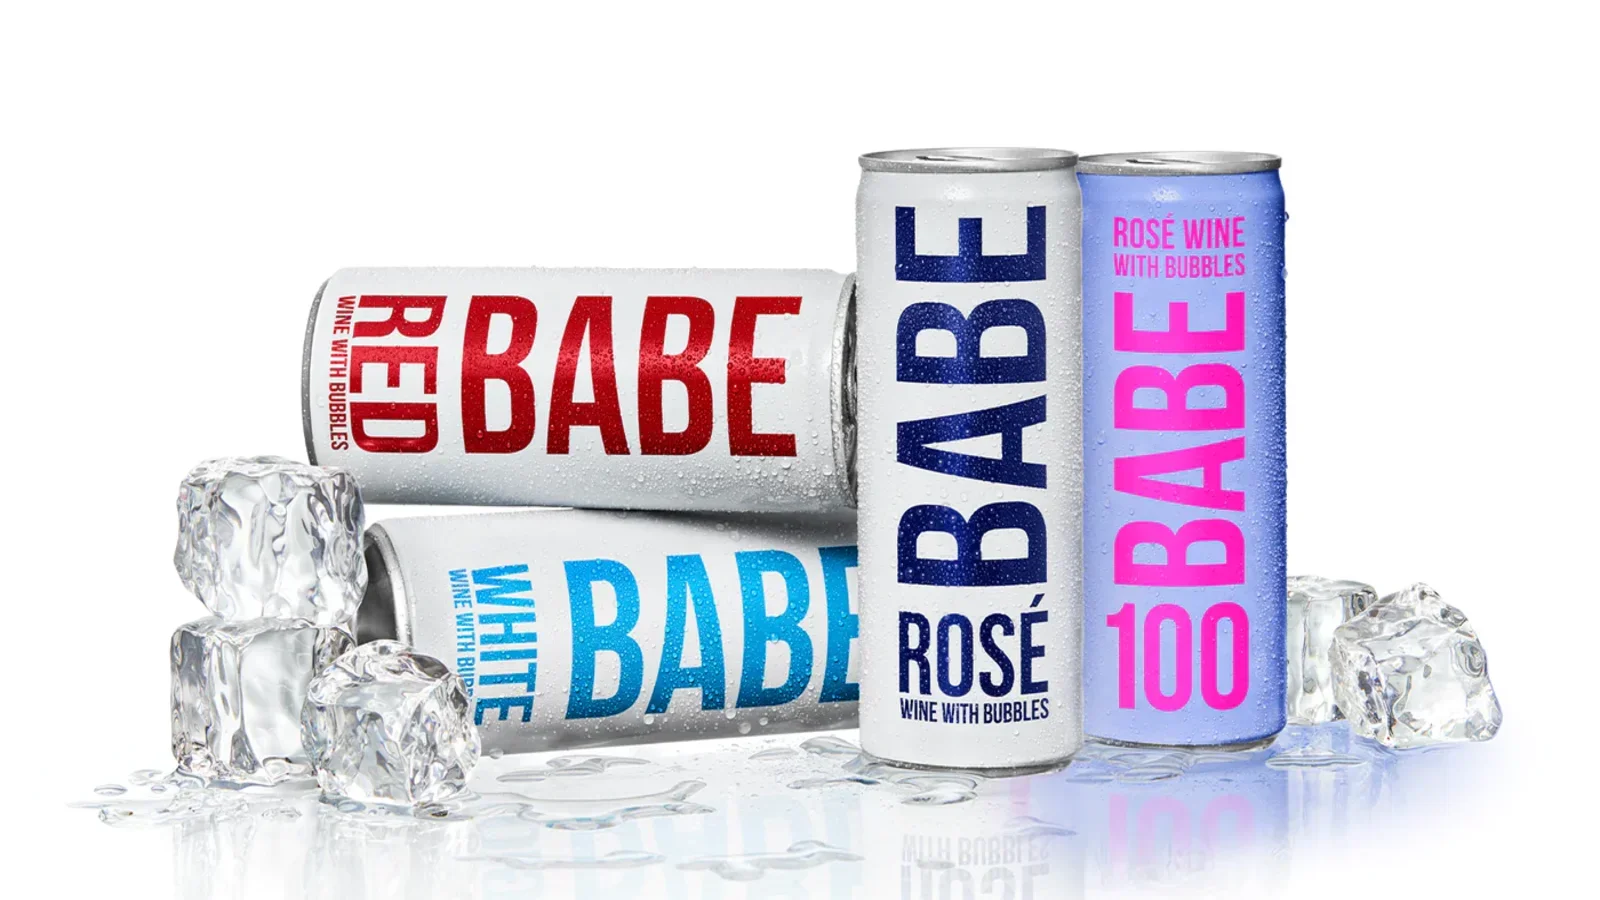 AB InBev ends commercialization of Babe Wine, HiBall canned drink brands